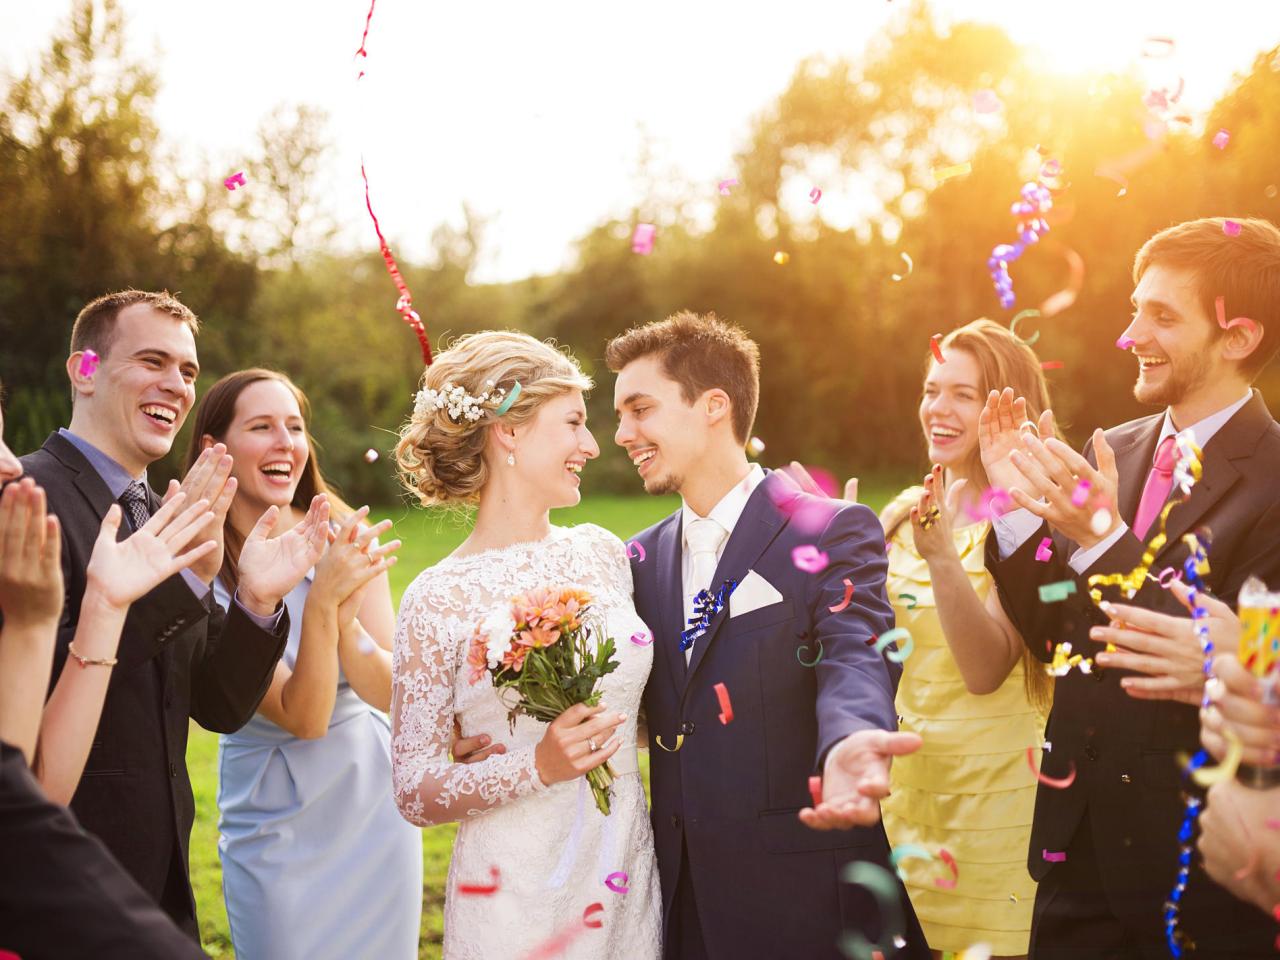 19 Rules All Wedding Guests Need to Follow 